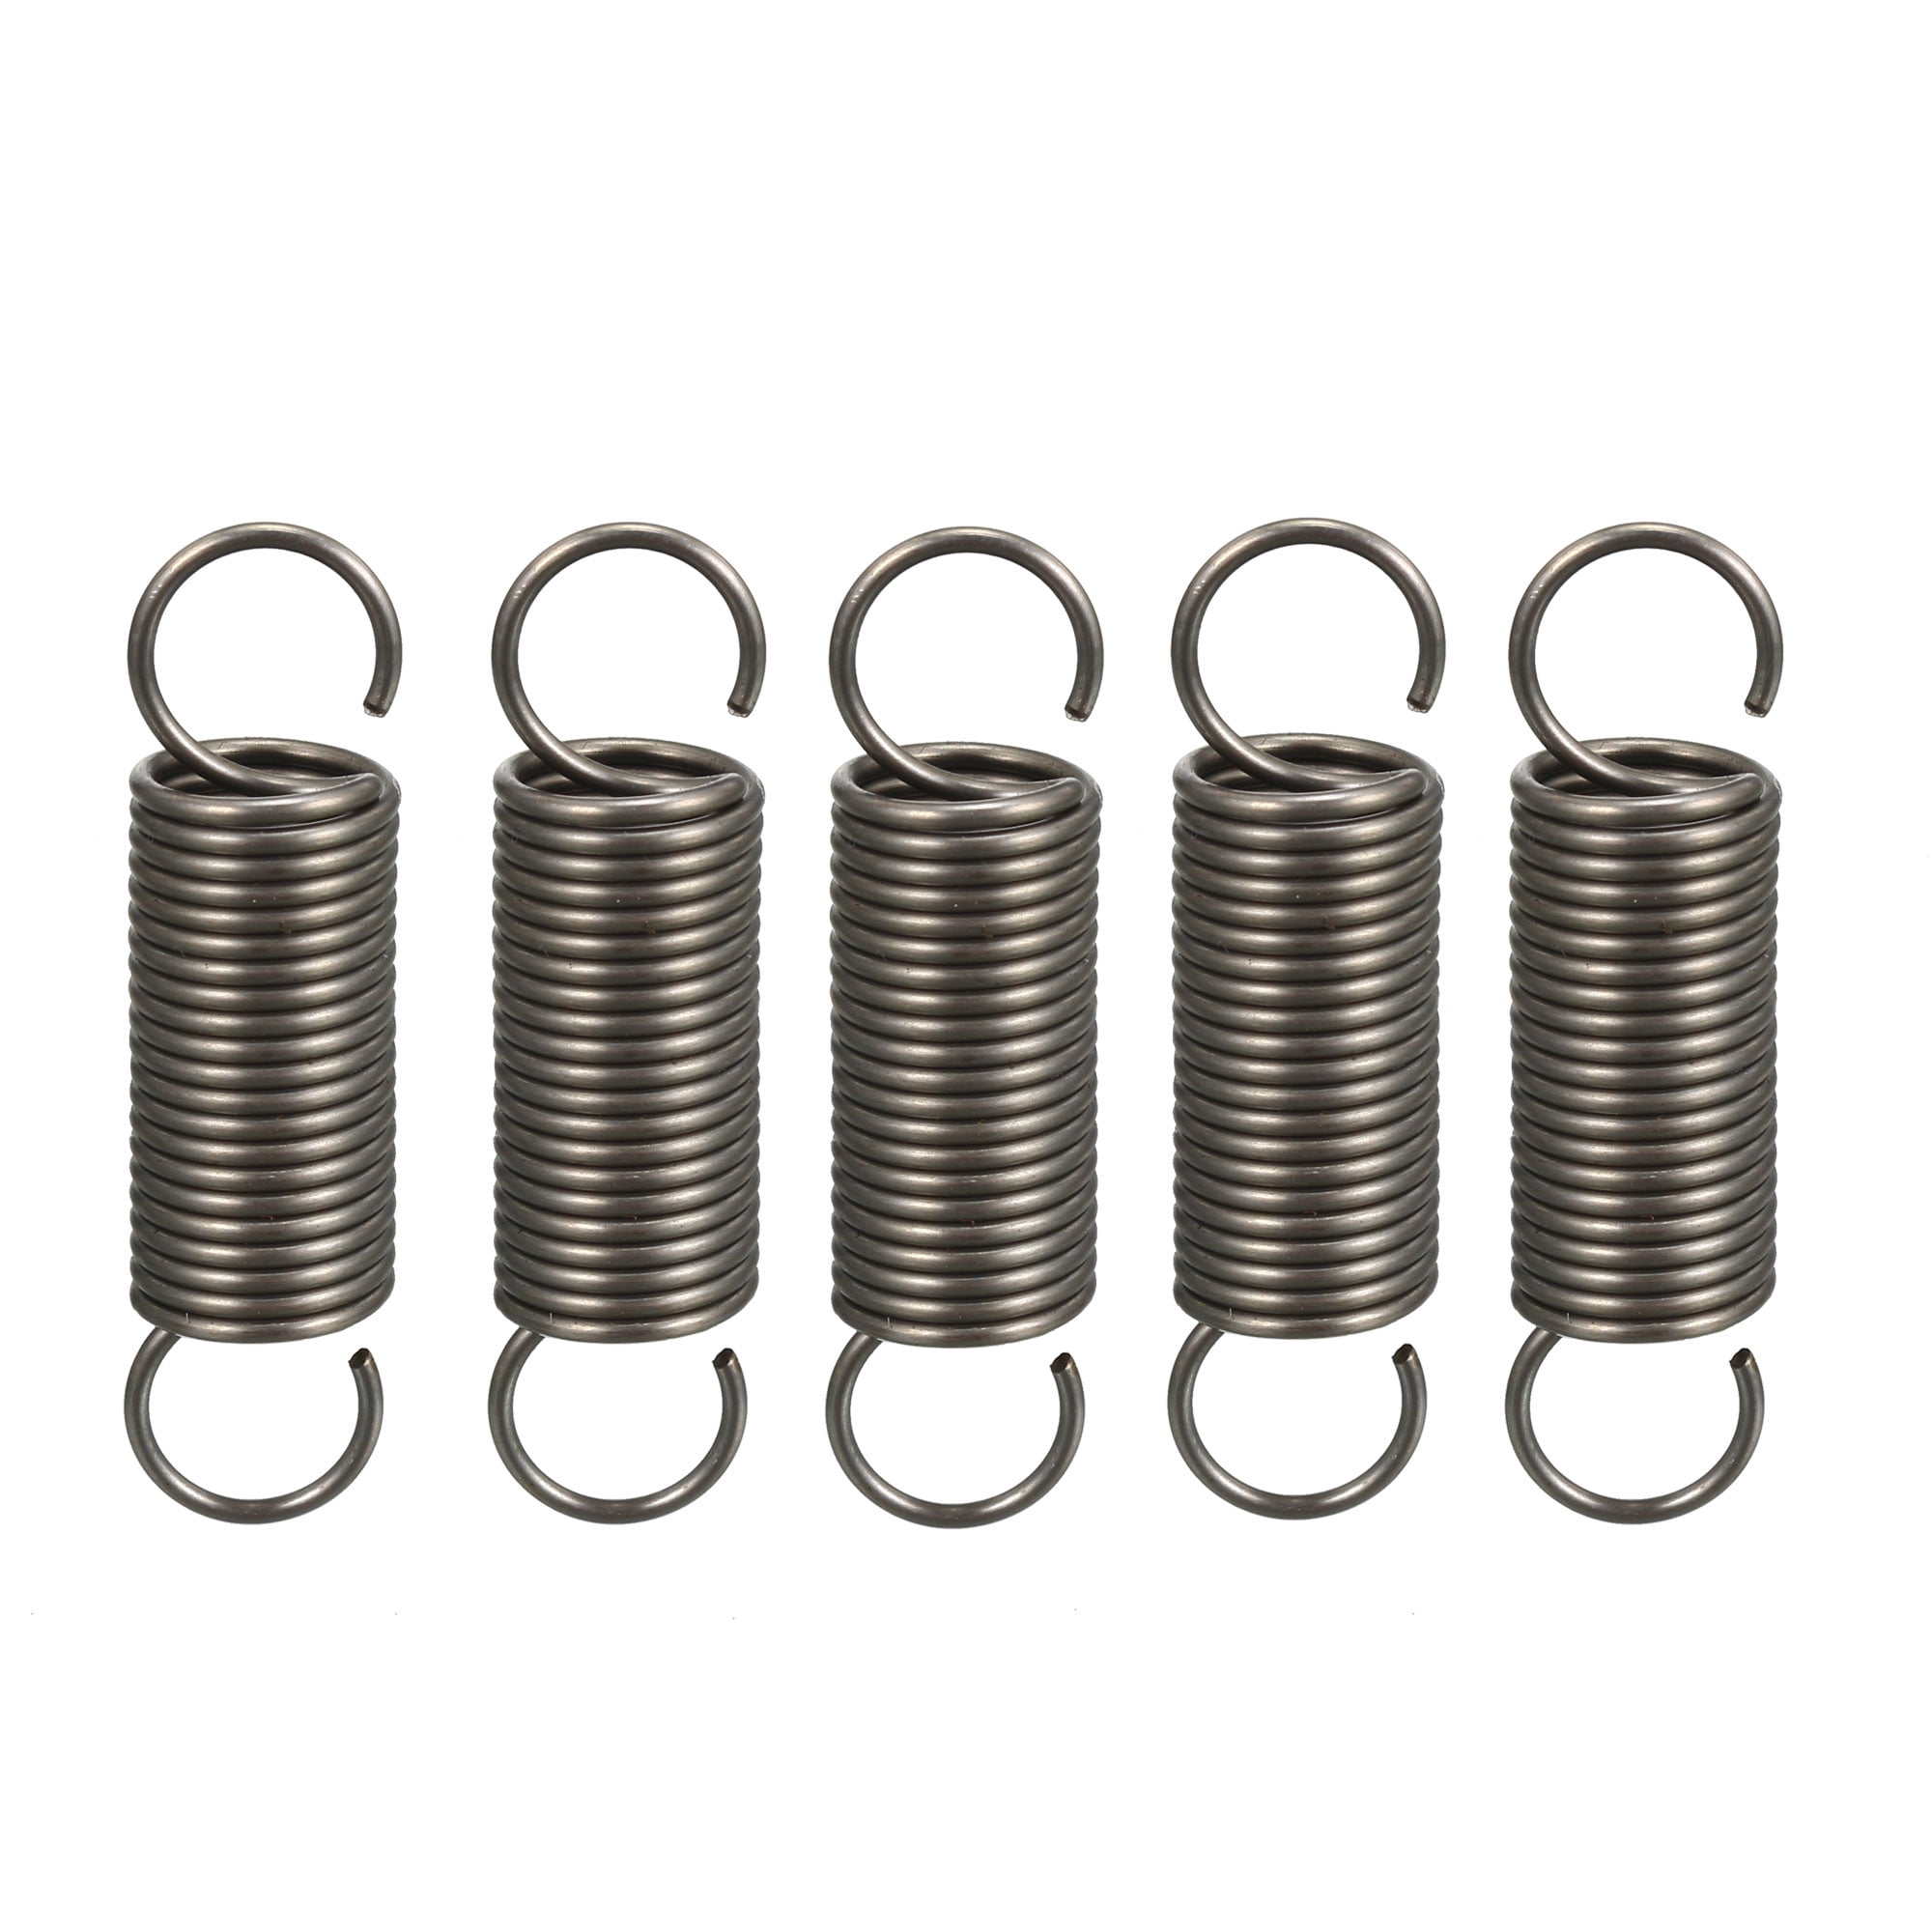 Details about   10PCS 15mm Stainless Steel small Tension Spring With Hook For Tensile D OH 